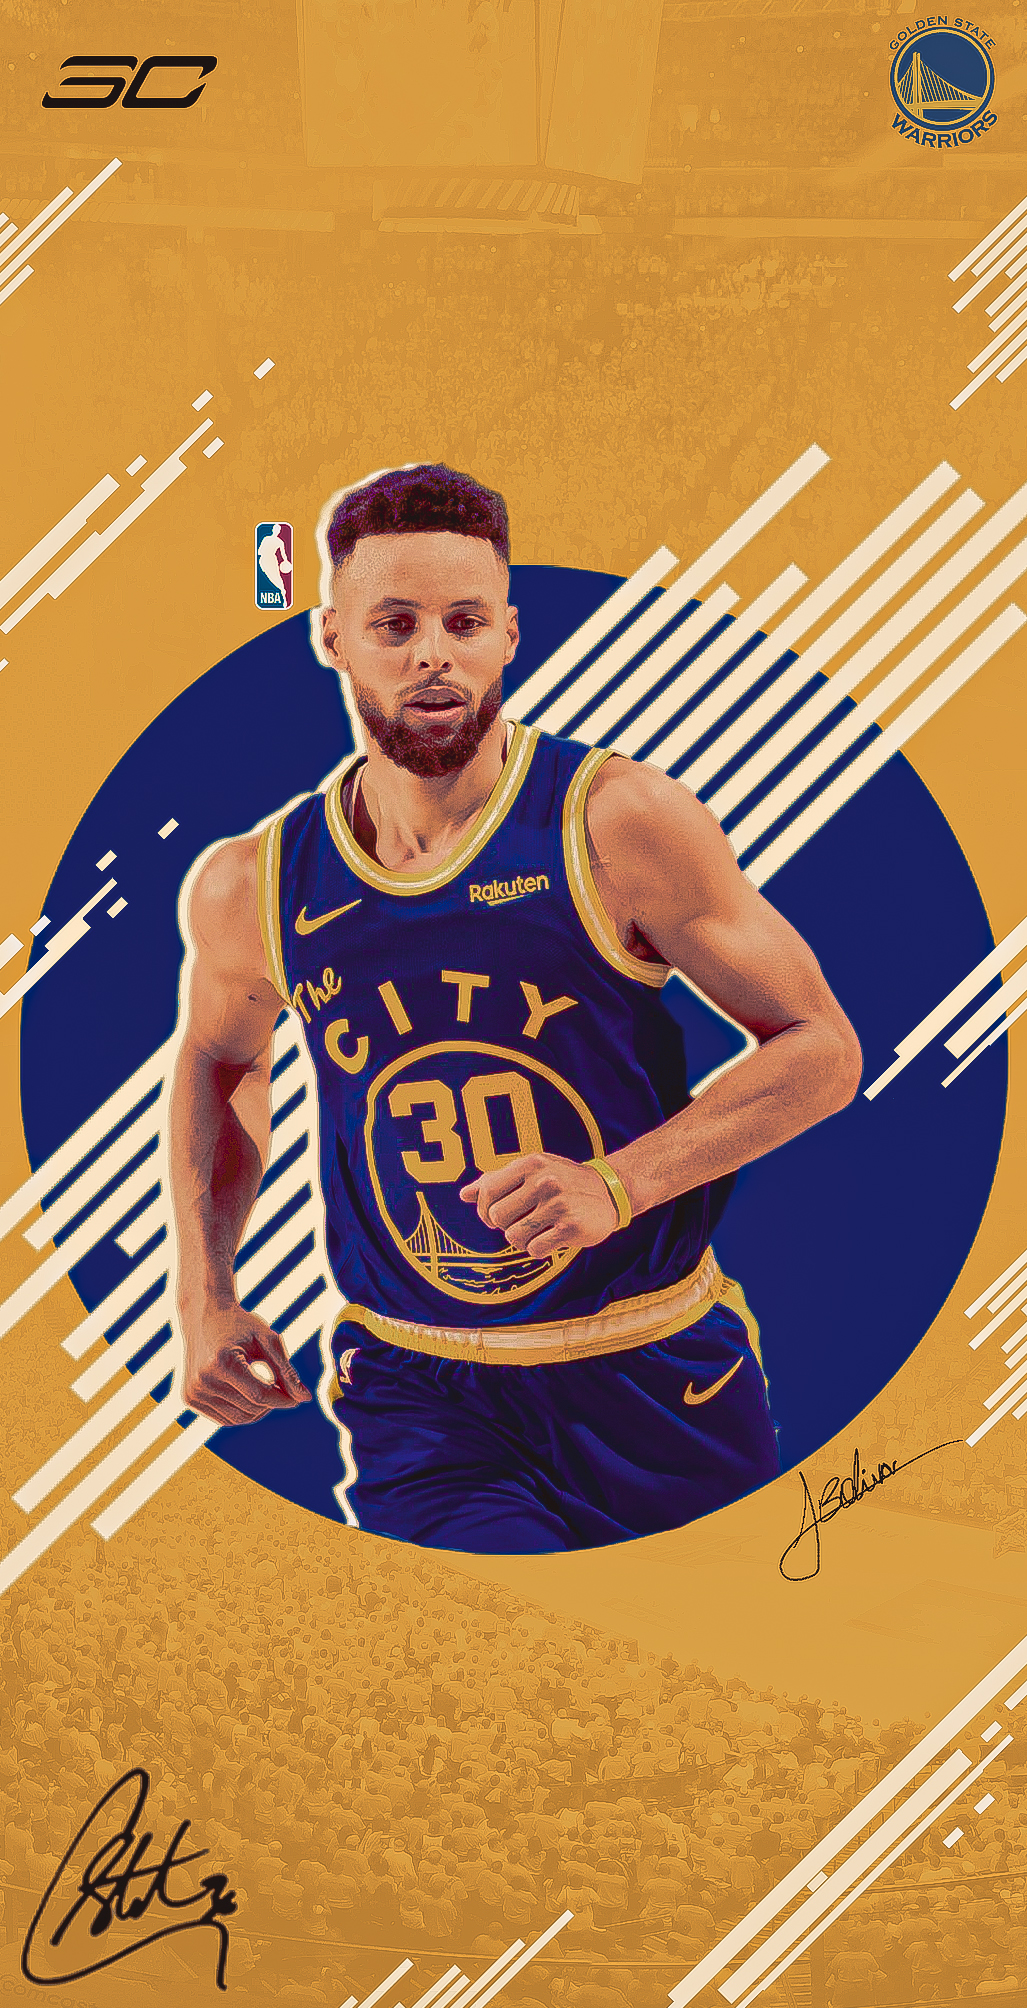 Steph Curry - Curry 30 - Jersey Wallpaper Download